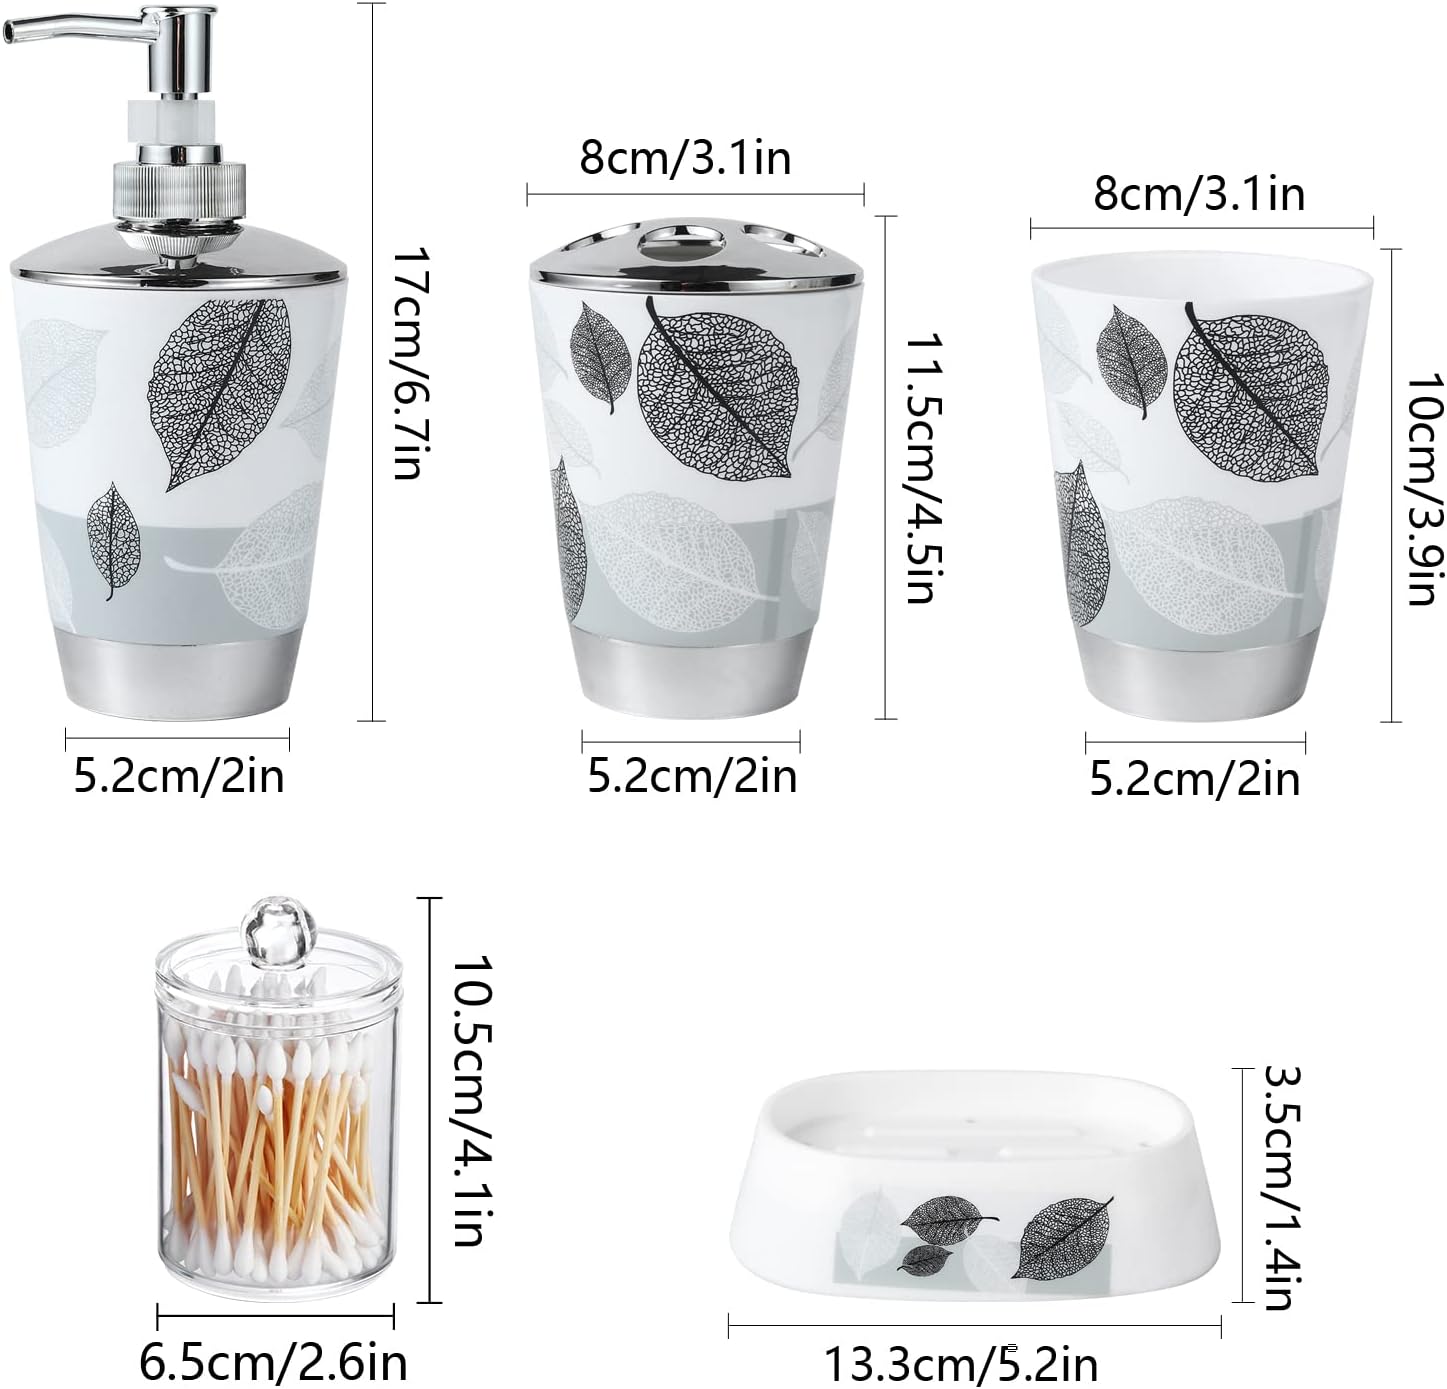 iMucci 4Pcs Bathroom Accessories Set With Cup Toothbrush Holder